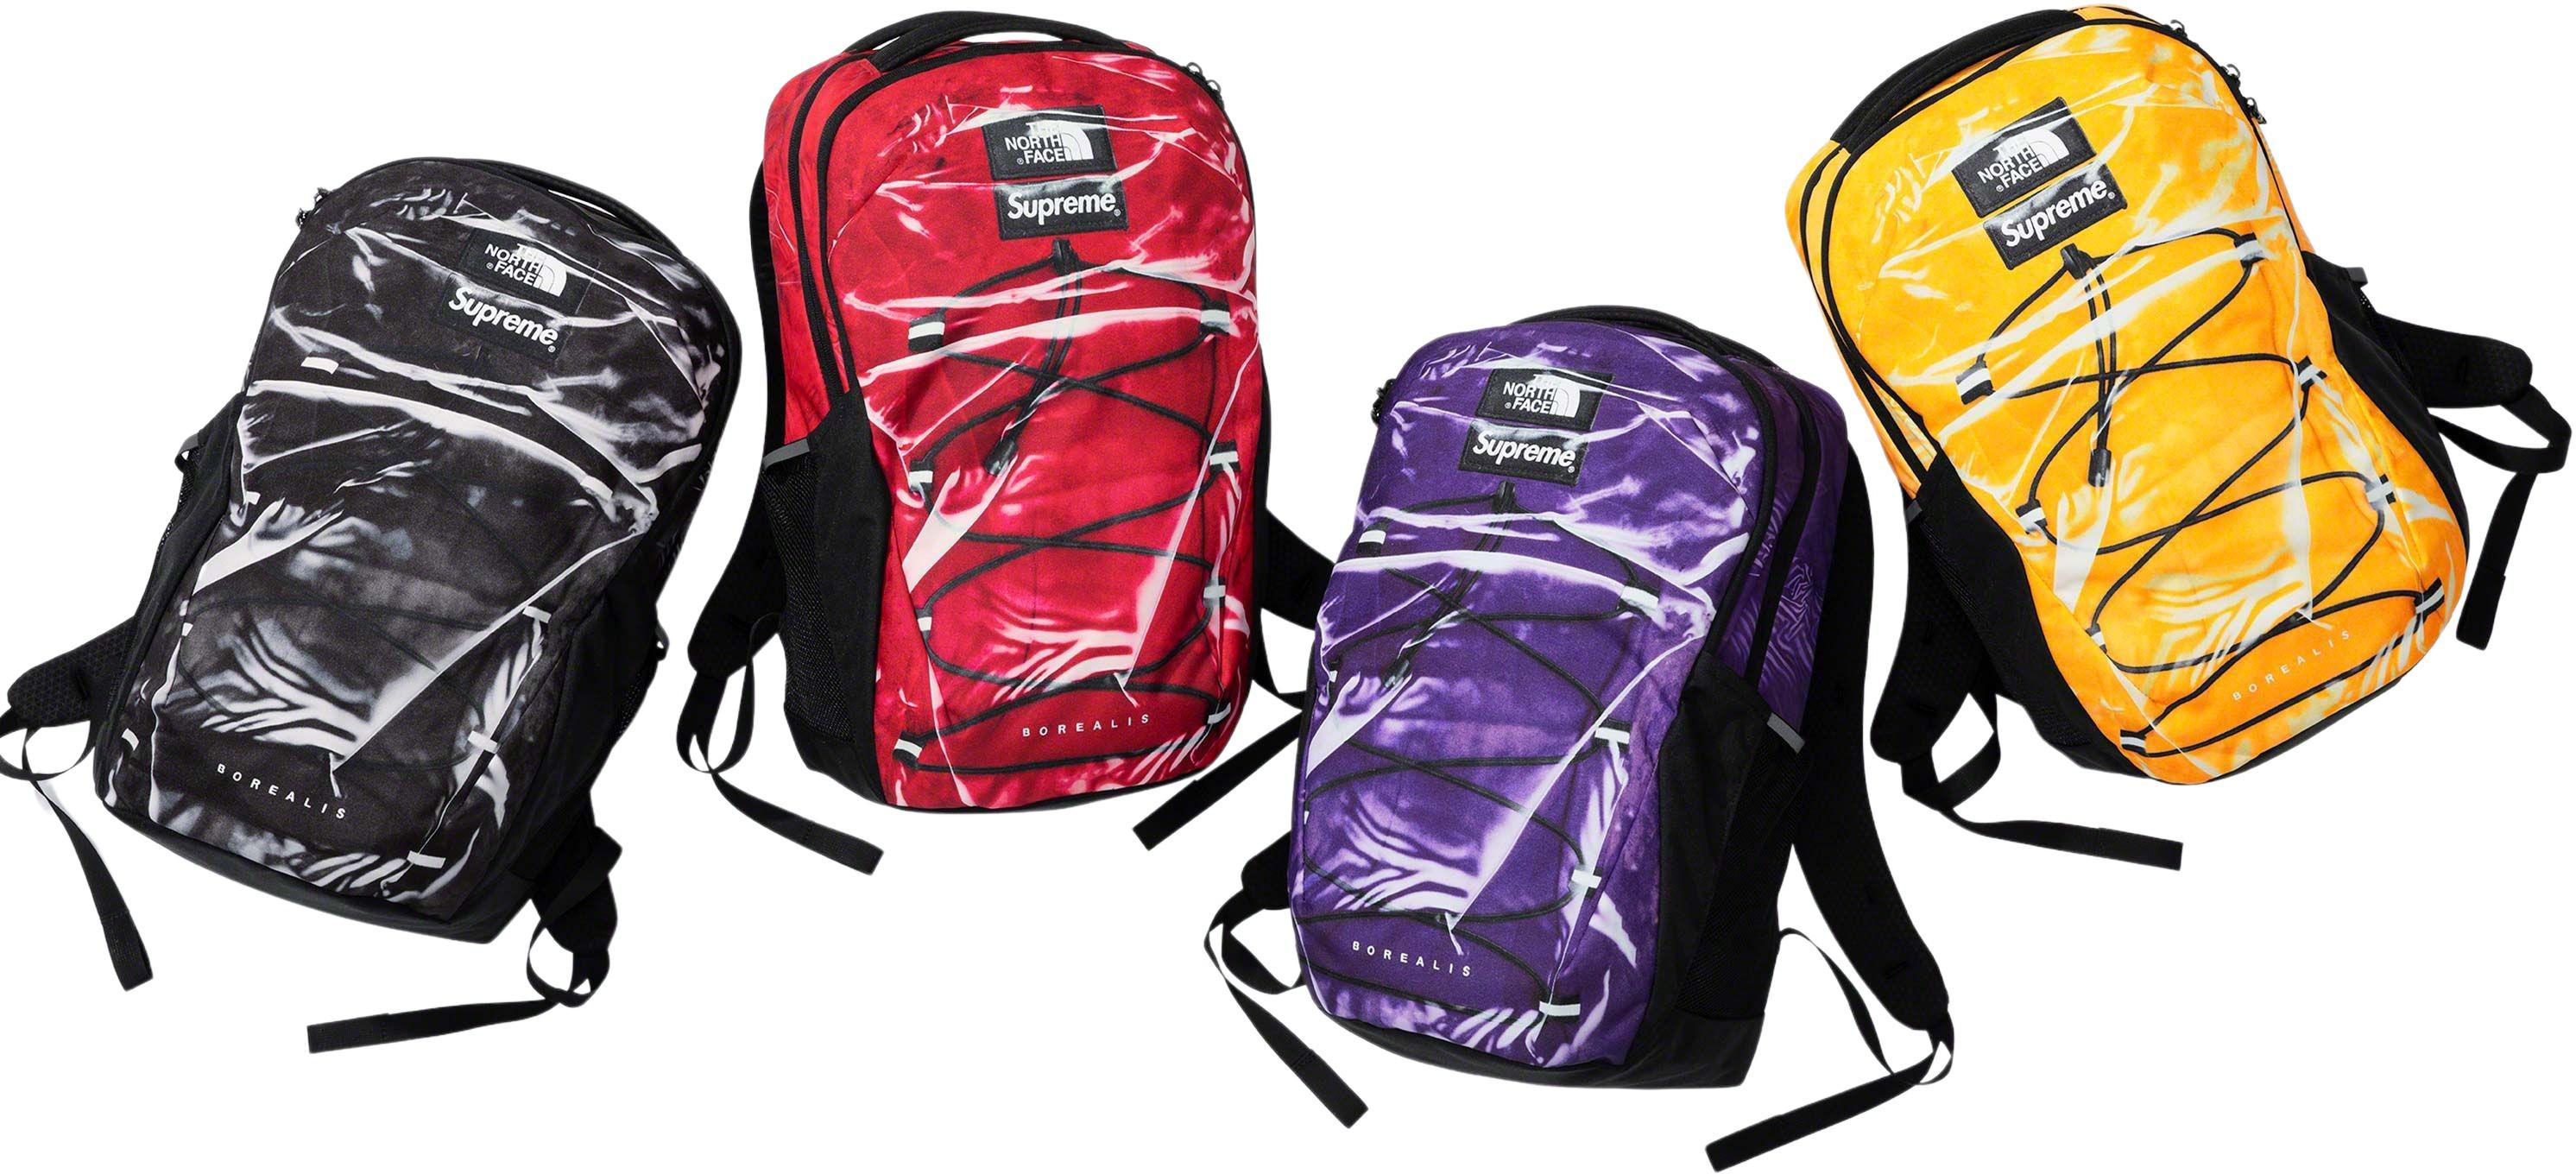 The North Face Trompe L'oeil Printed Borealis Backpack - spring